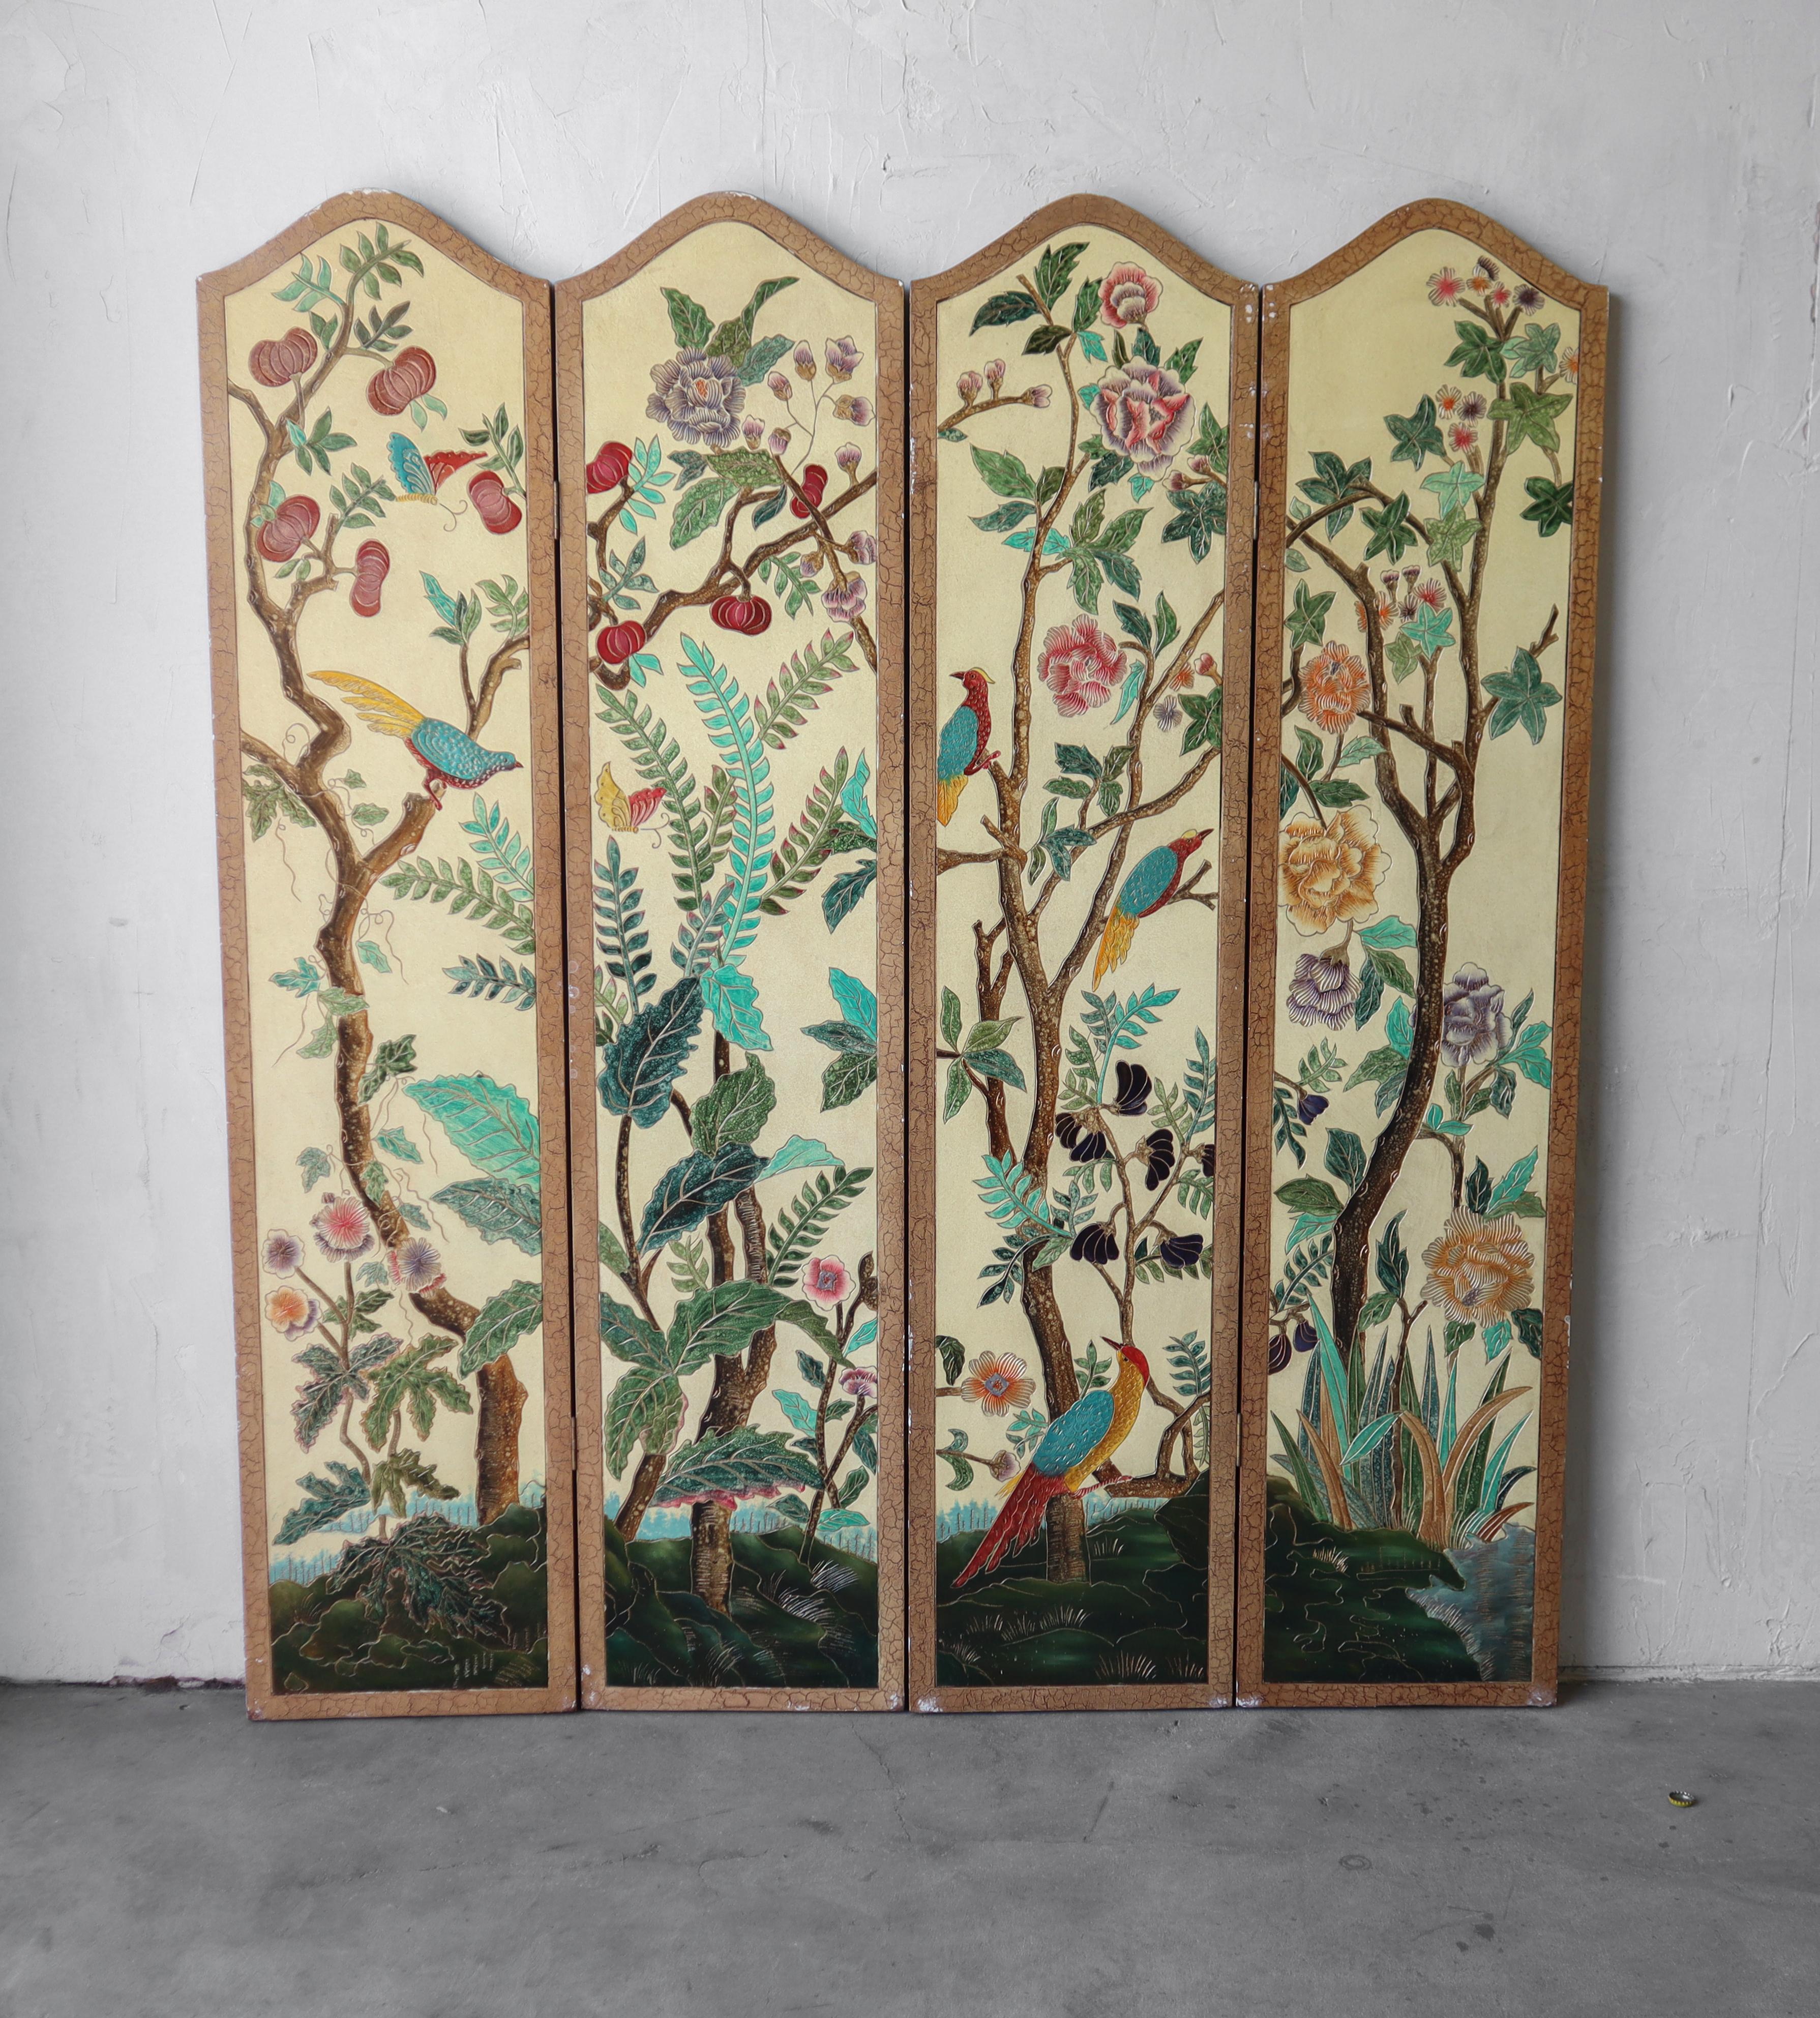 Art or function this beautiful vintage room divider can be used either way. Adorned with a avian and botanical theme I can envision this in a feminine space, a bedroom or even as a store fixture.  A beautiful pop of color.  It can be mounted or left